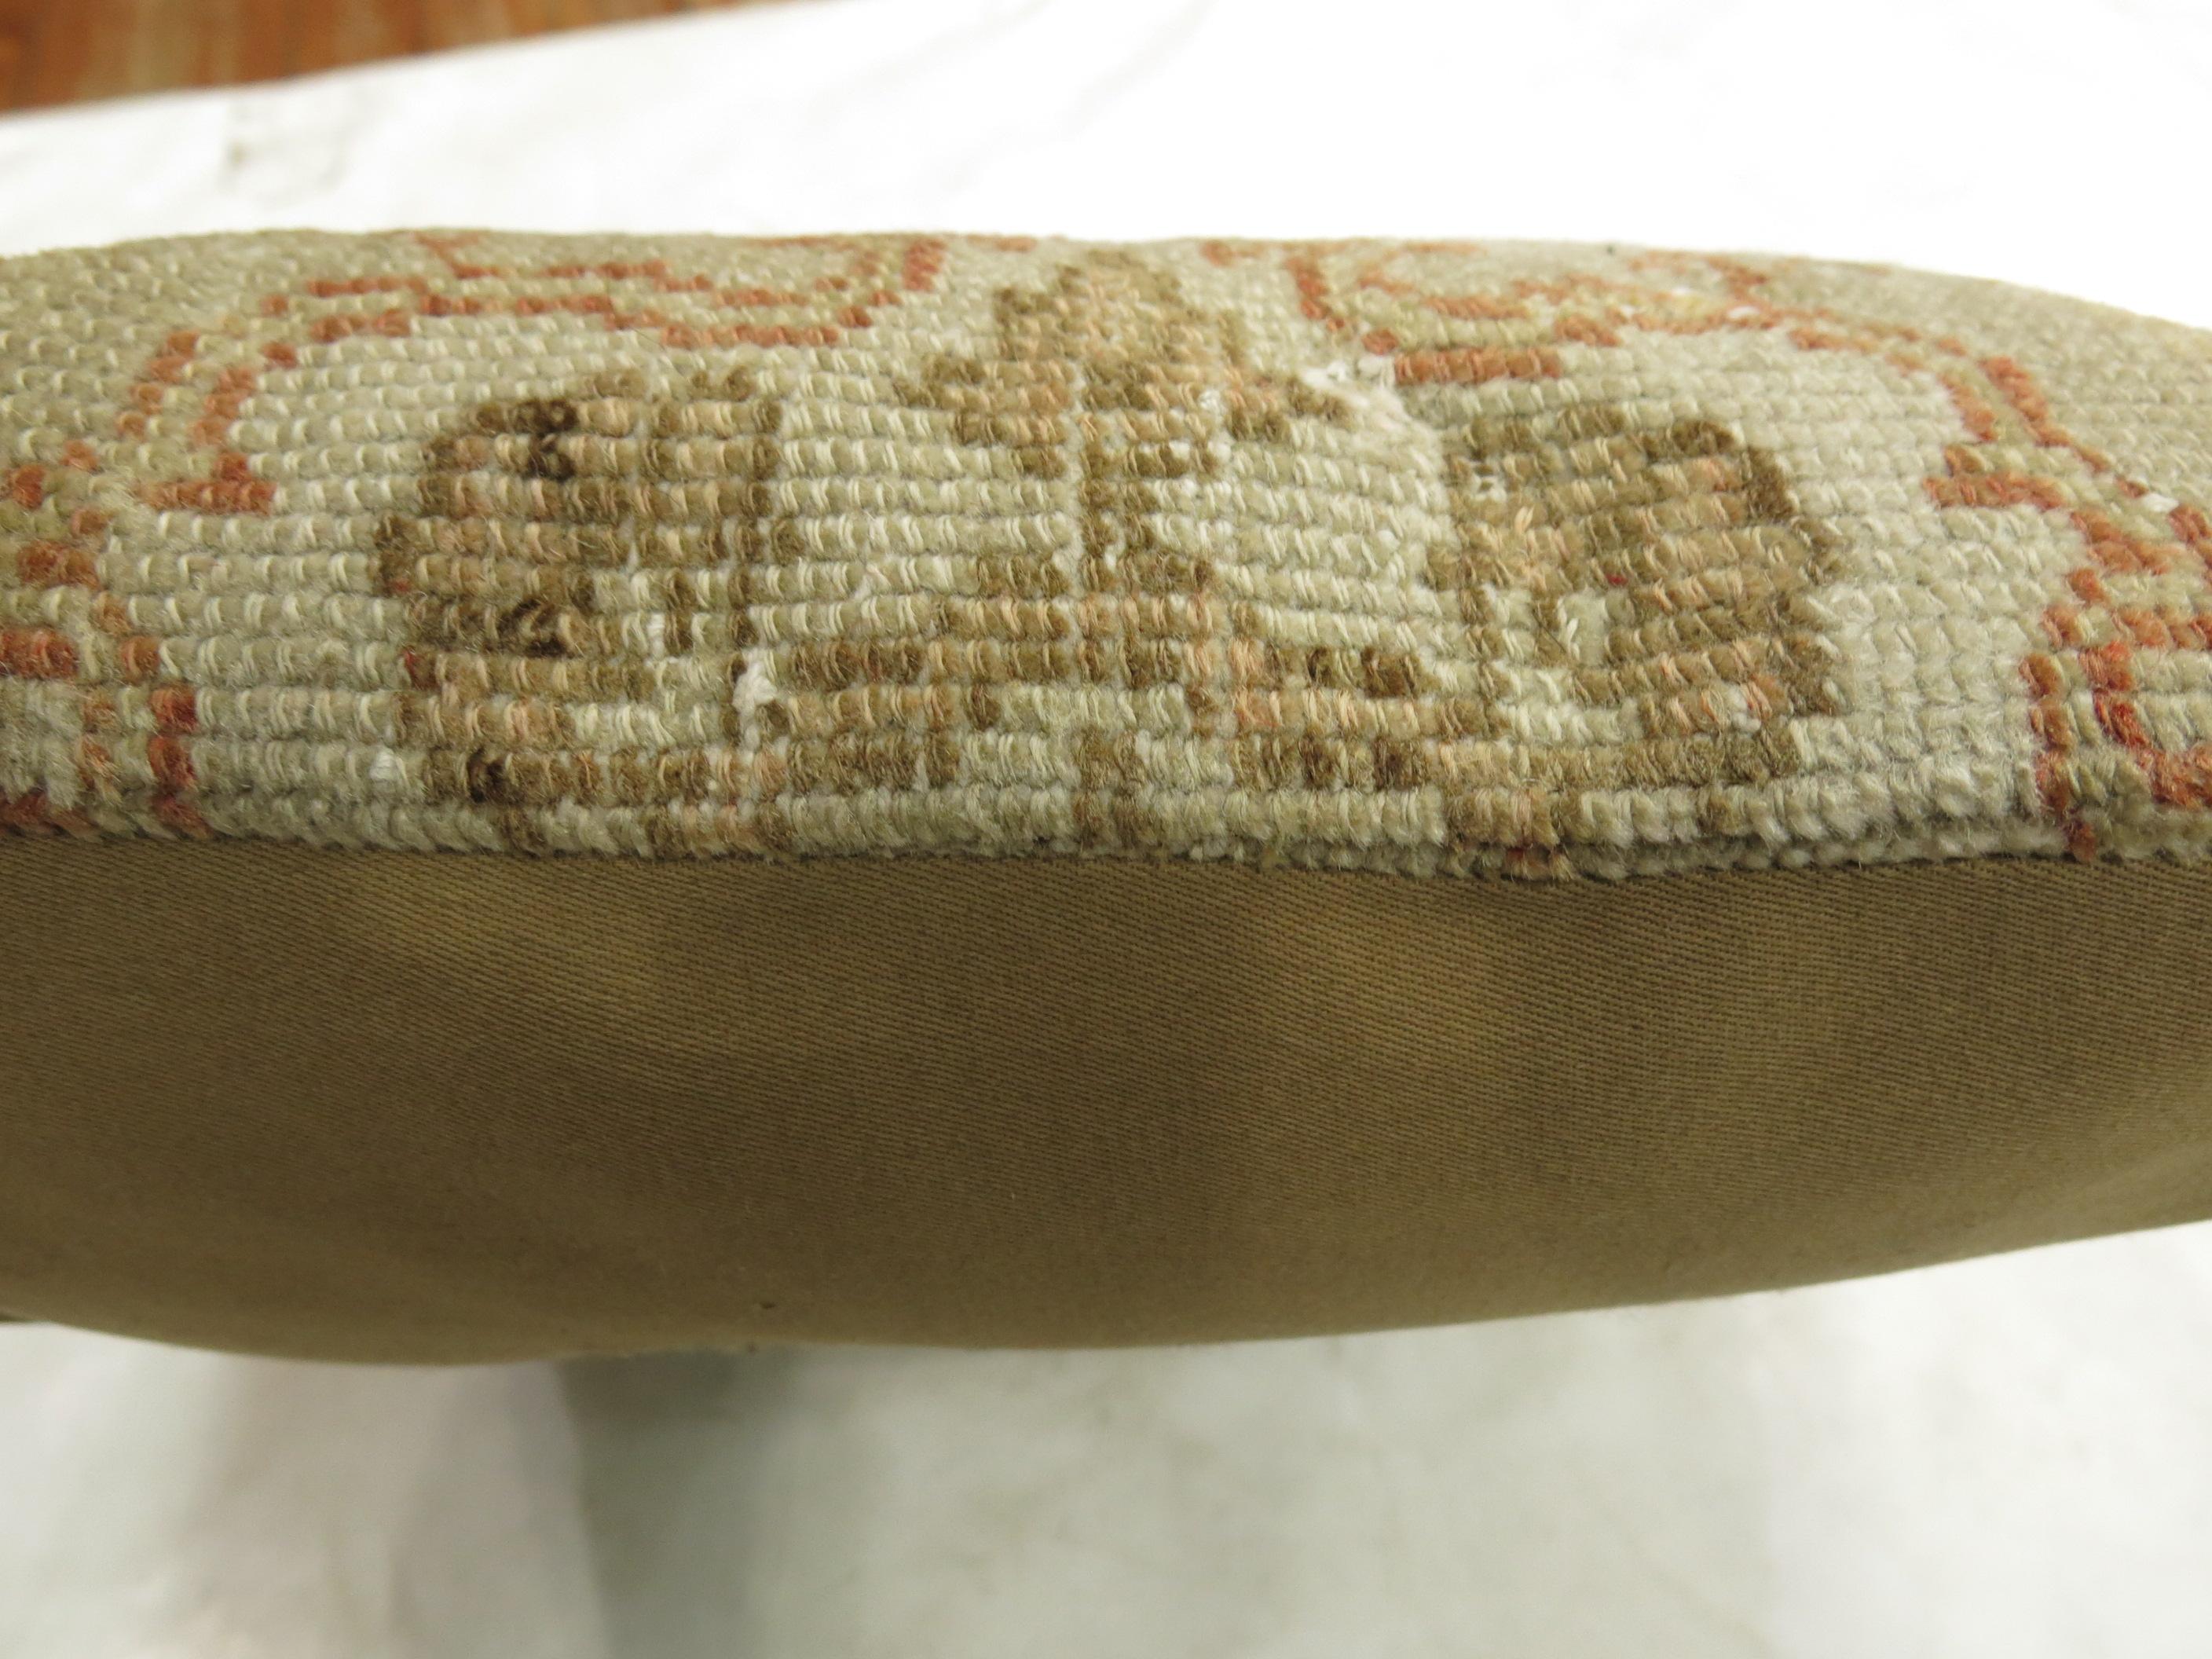 Pillow made from a Turkish Oushak rug. Coral, cream, soft brown accents.

Measures: 16